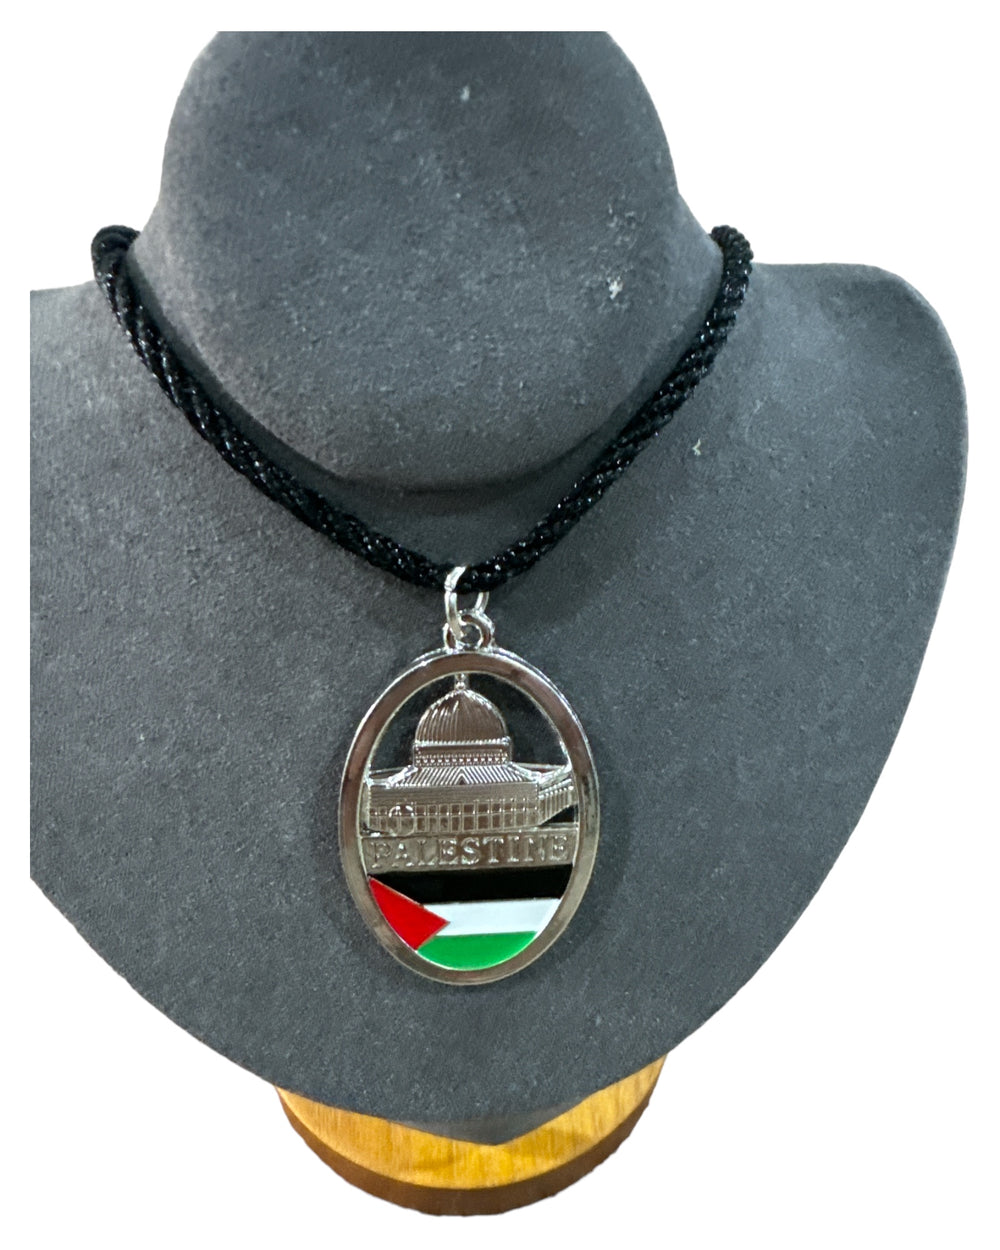 Heritage Circle Necklace: Dome of the Rock and Palestine Flag